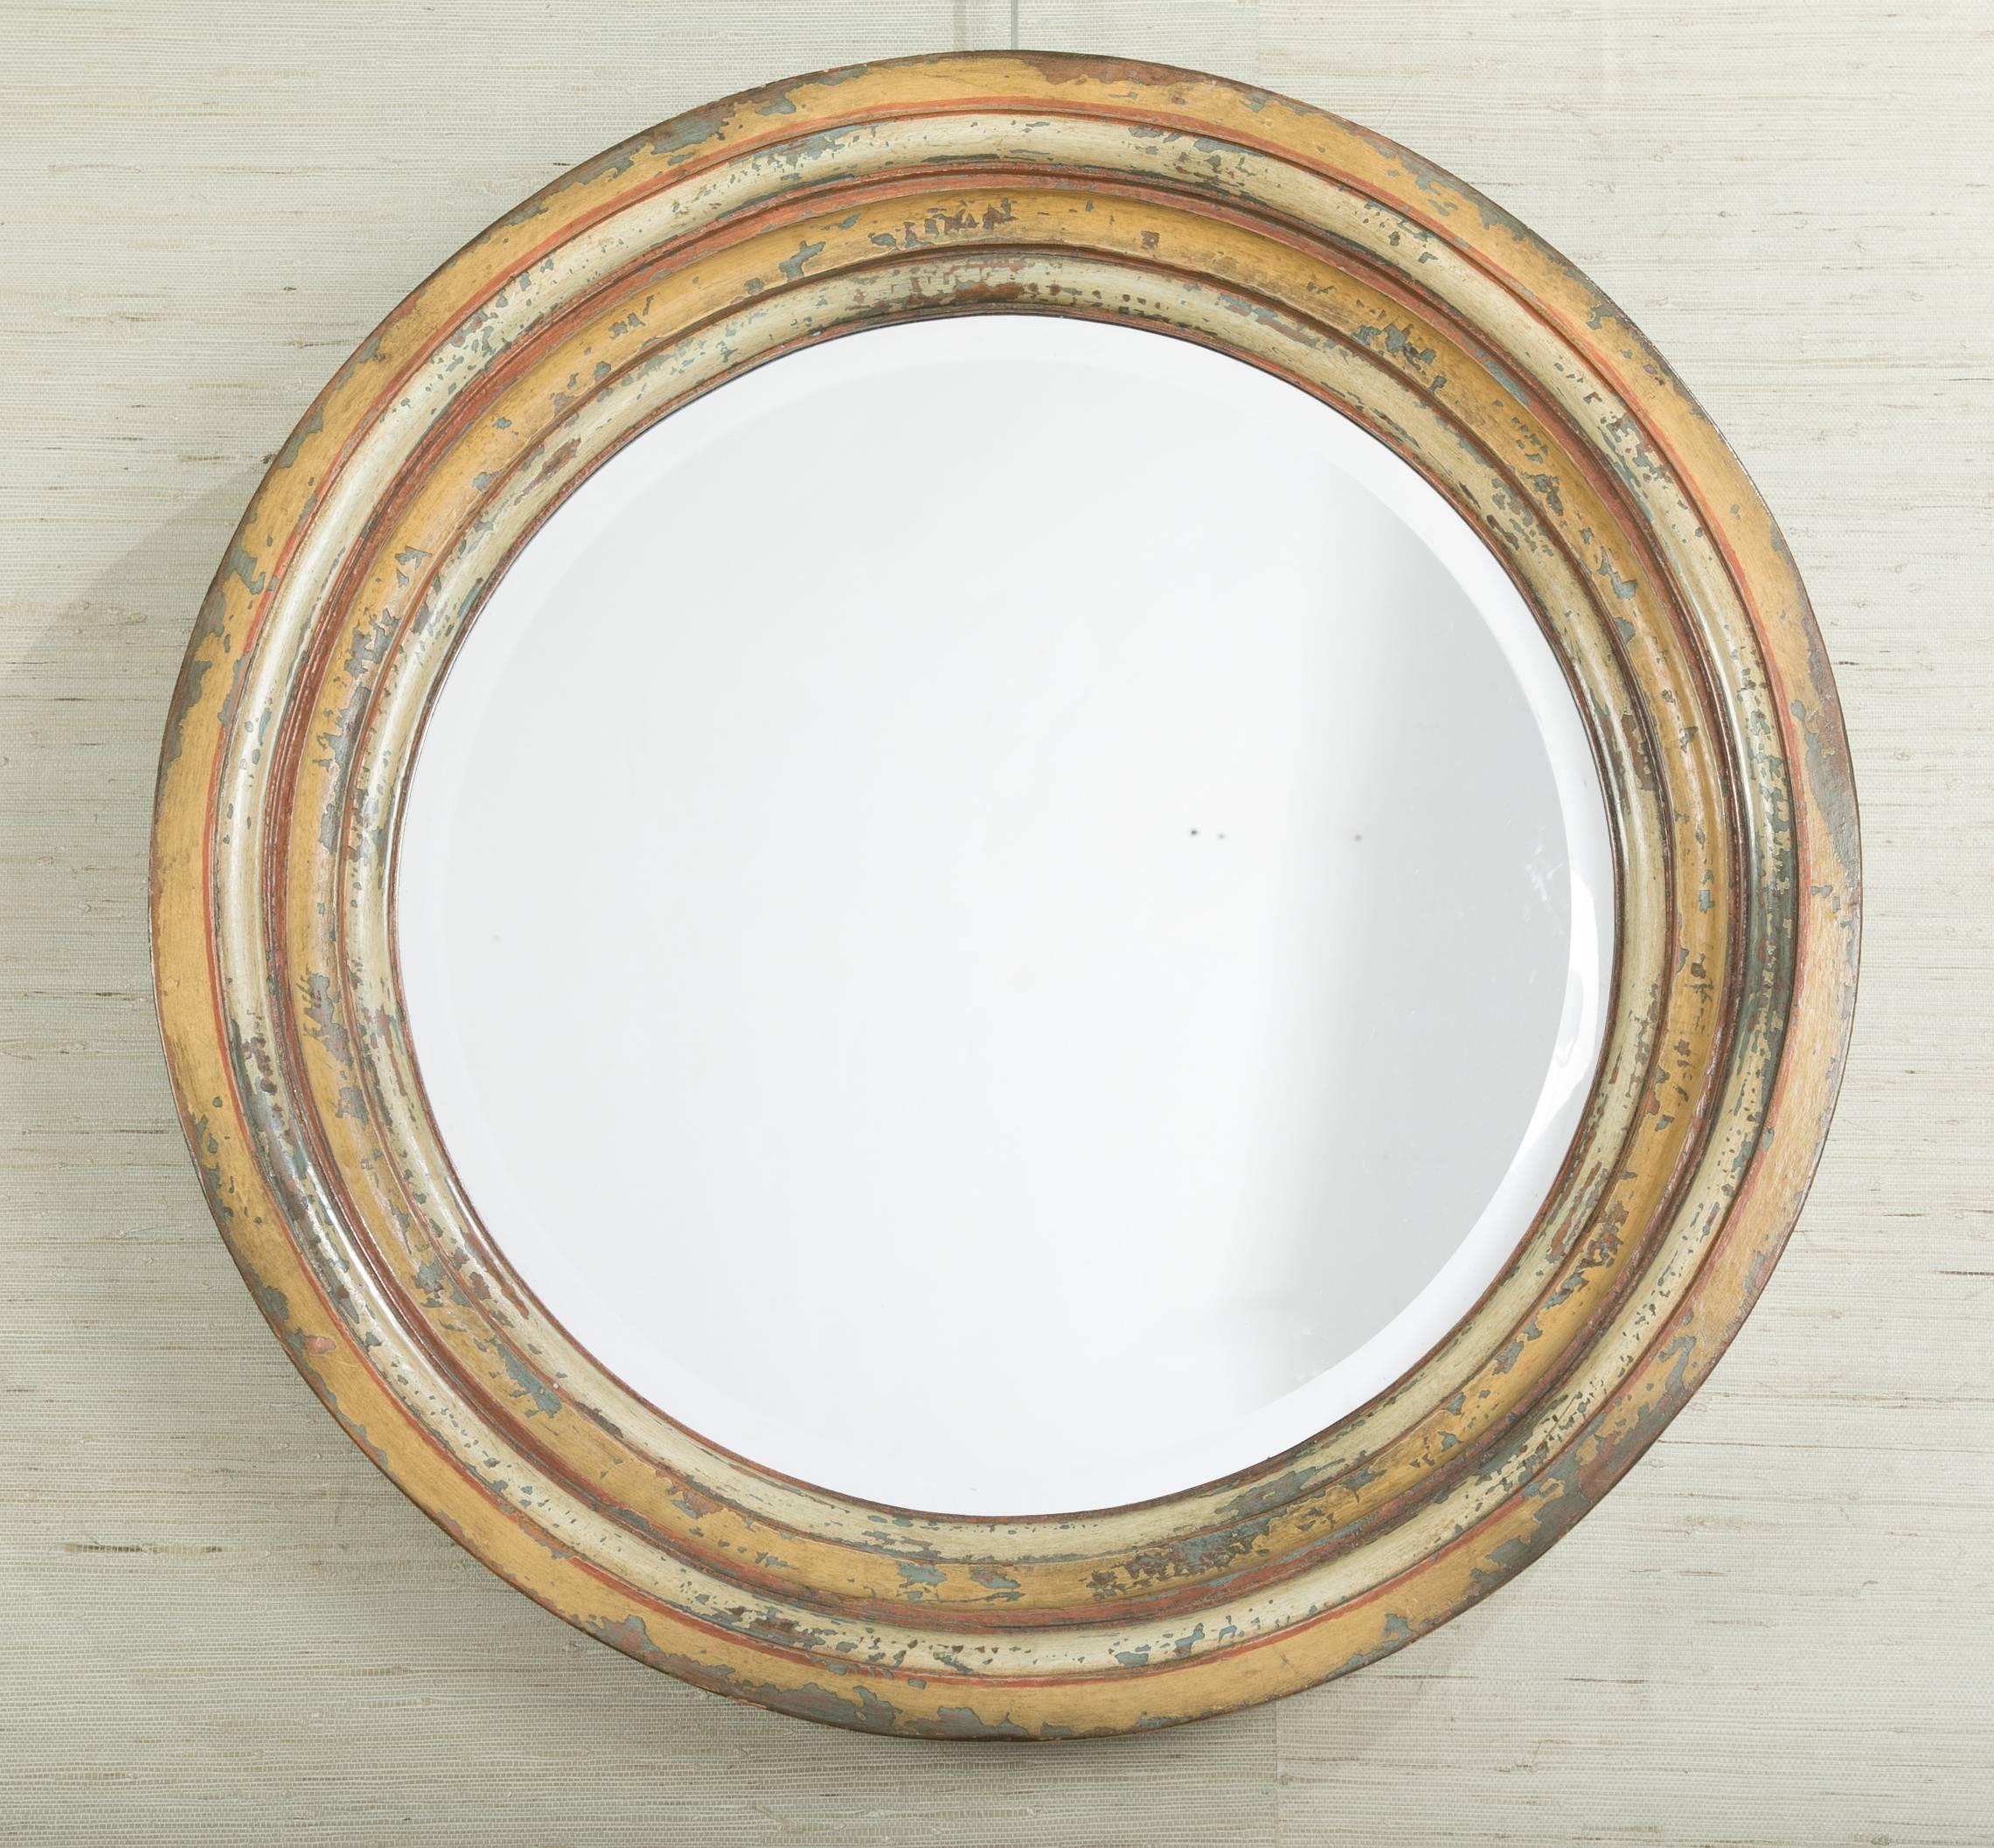 Italian circular mirror with deep carved wood molding and wonderful distressed painted surface that makes the mirror appear to be made of metal. The depth of this mirror, 4 inches, as well at the graduated carved molding and beveled glass give it